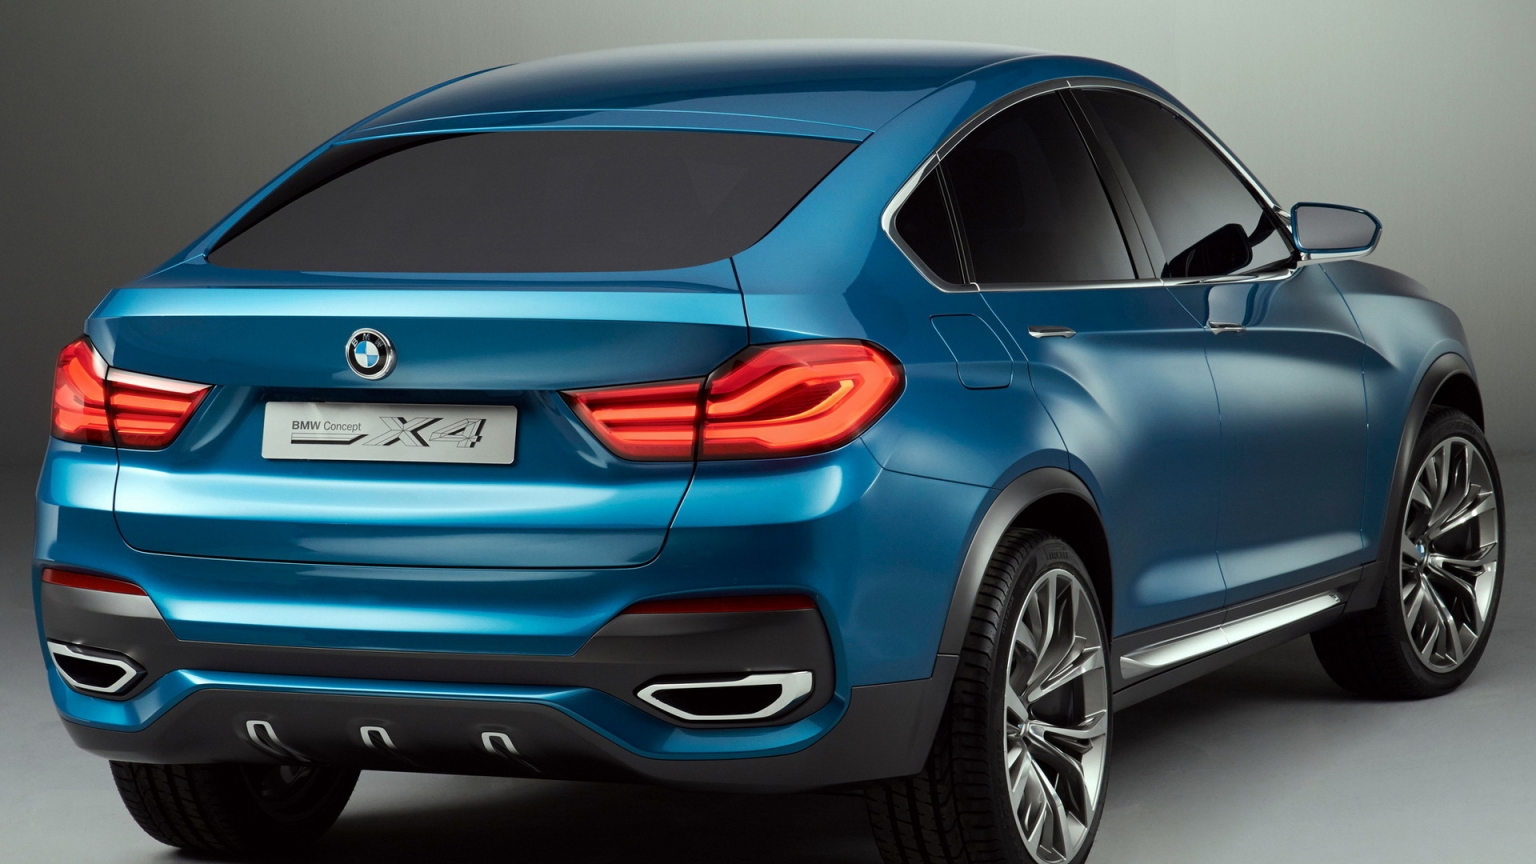 BMW X4 Back View for 1536 x 864 HDTV resolution